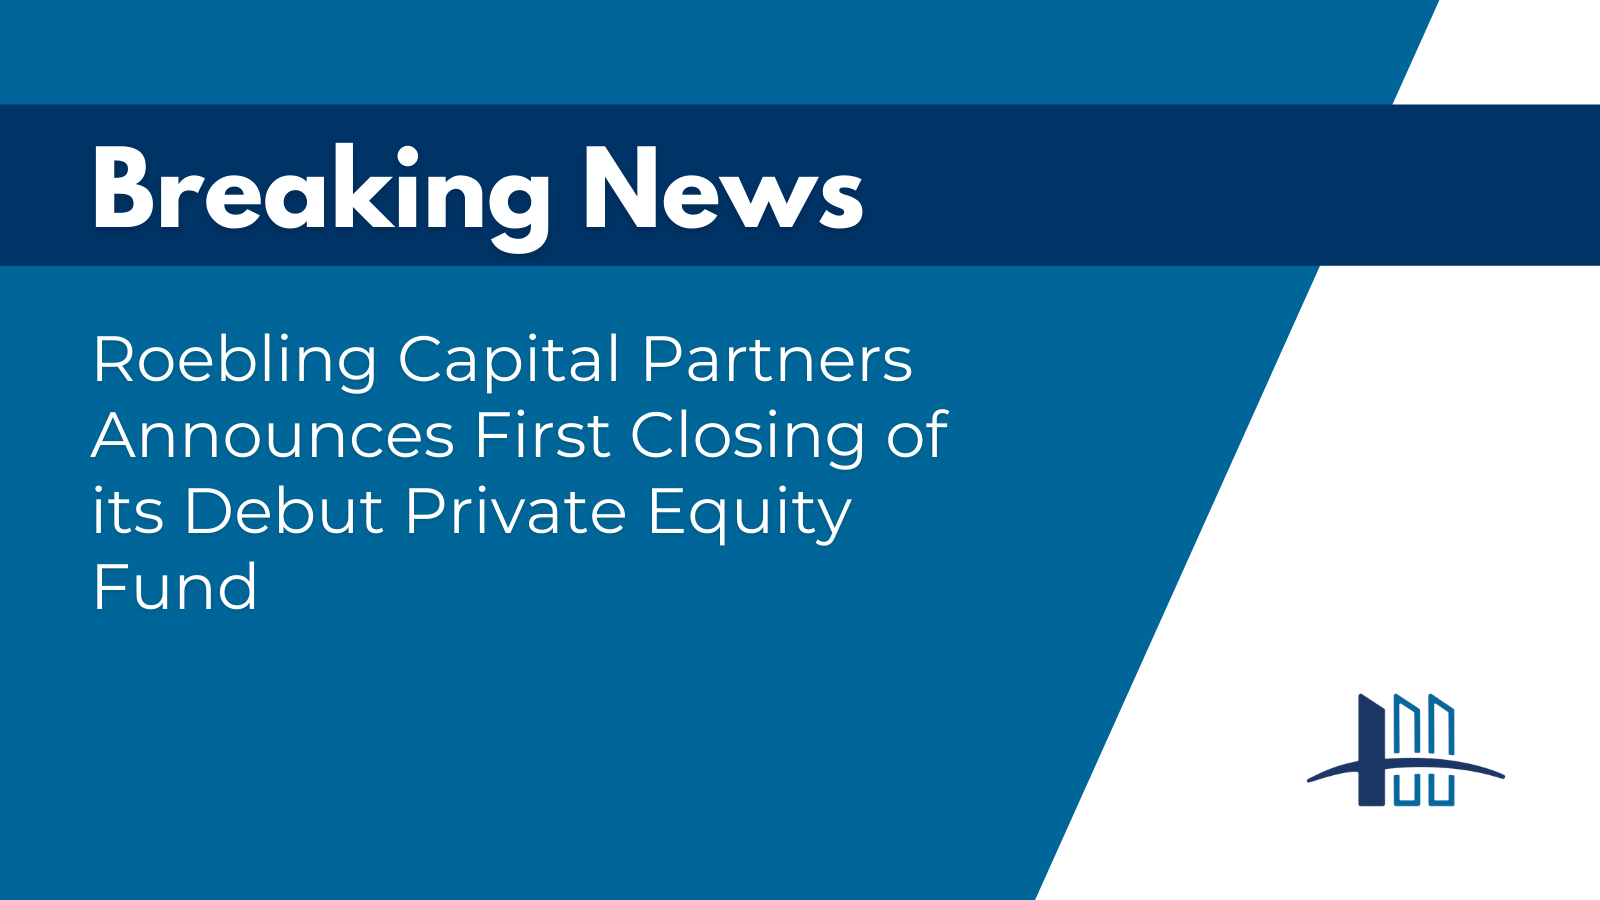 Roebling Capital Partners announces first closing